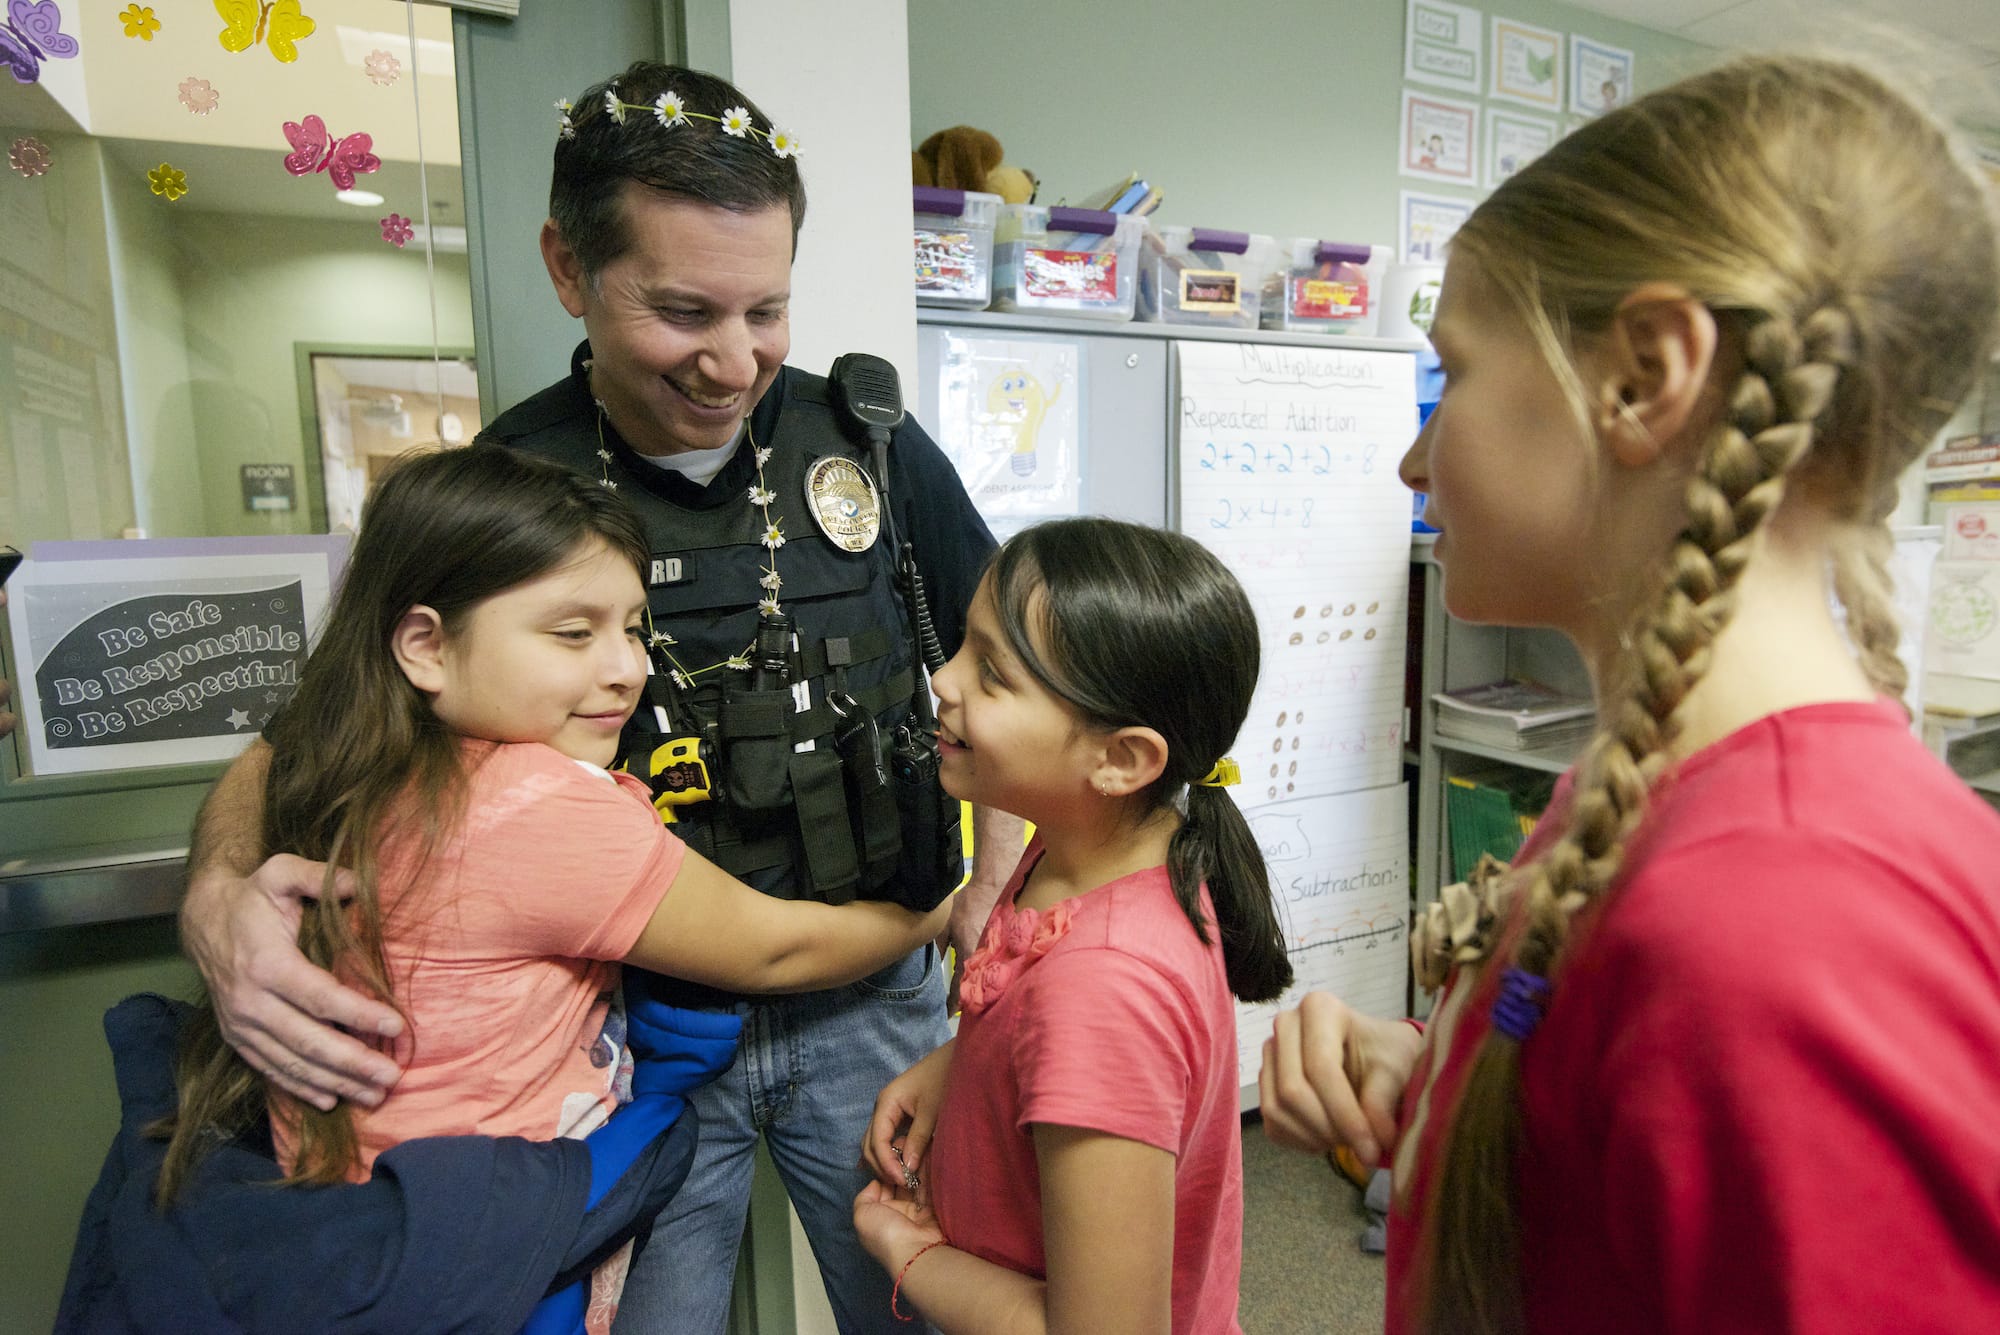 Vancouver police Detective Adam Millard receives a hug from third-grader Berenice Pintor, 9, left, and Maritza Sanchez, 9, on Friday before spring break at Fruit Valley Elementary School.